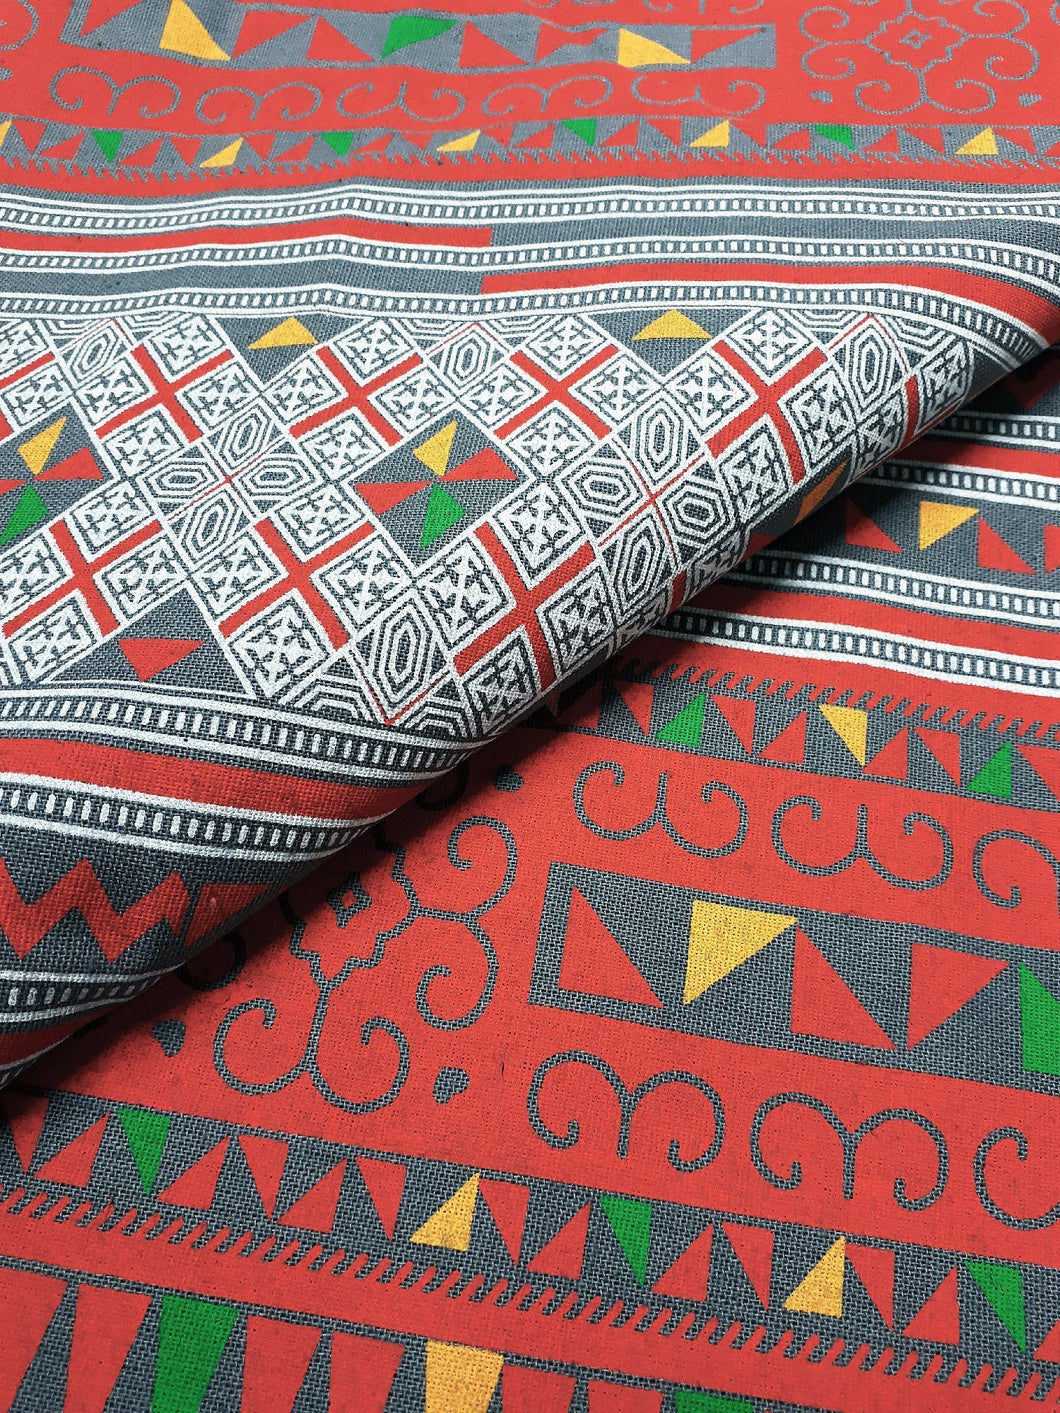 Thai Cotton Fabric Tribal Fabric Native Fabric by the yard Ethnic fabric Craft Supplies Hill Tribe Textile 1/2 yard Gray (TCF7)